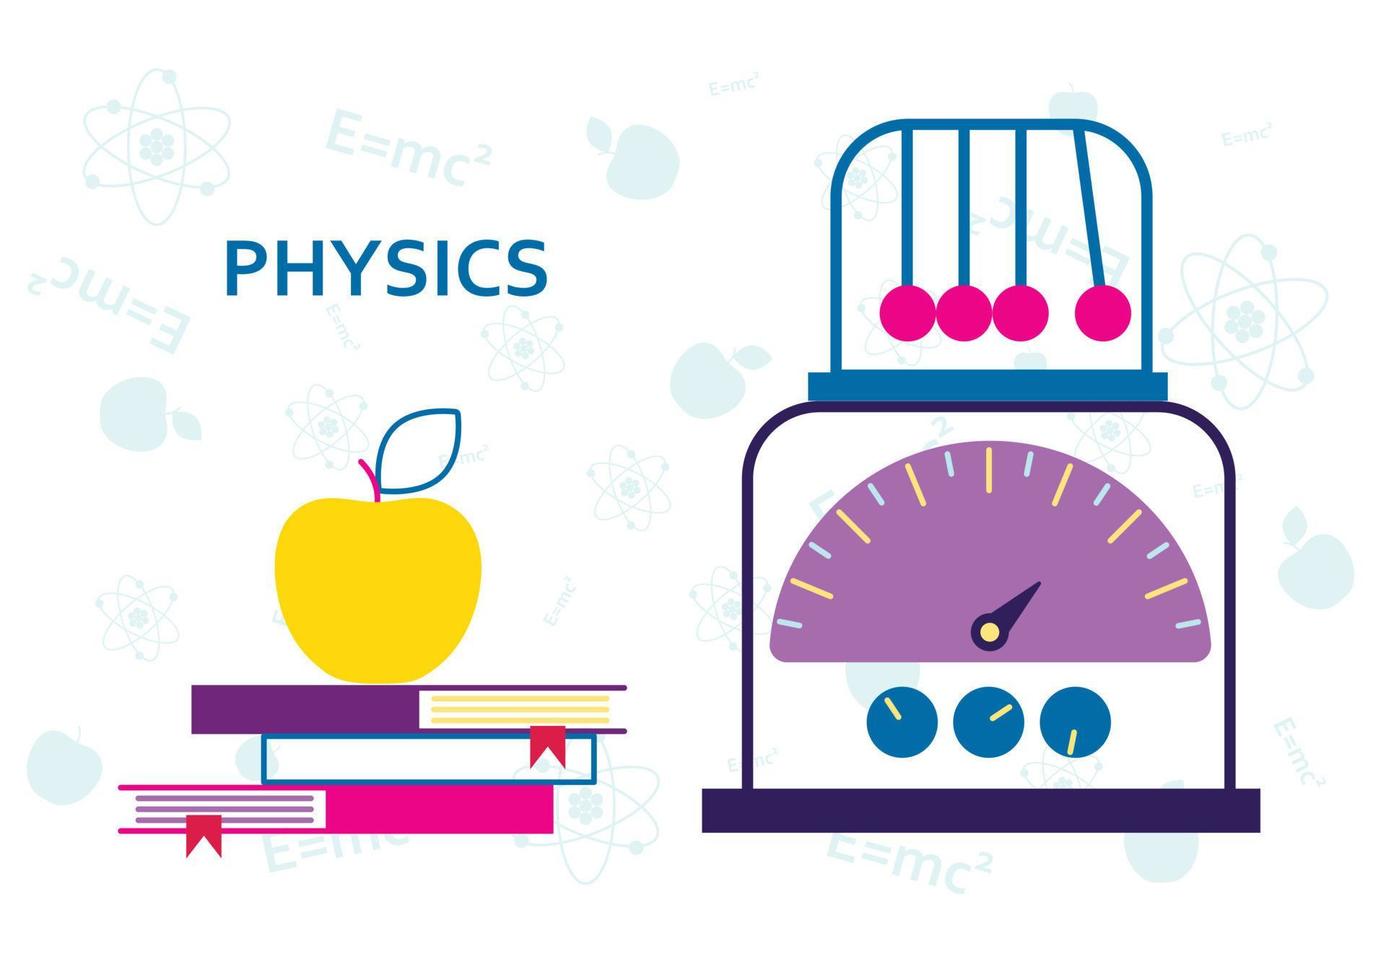 Physics lesson at school, studying science, physical research. Modern flat vector illustration for banner, website, background.